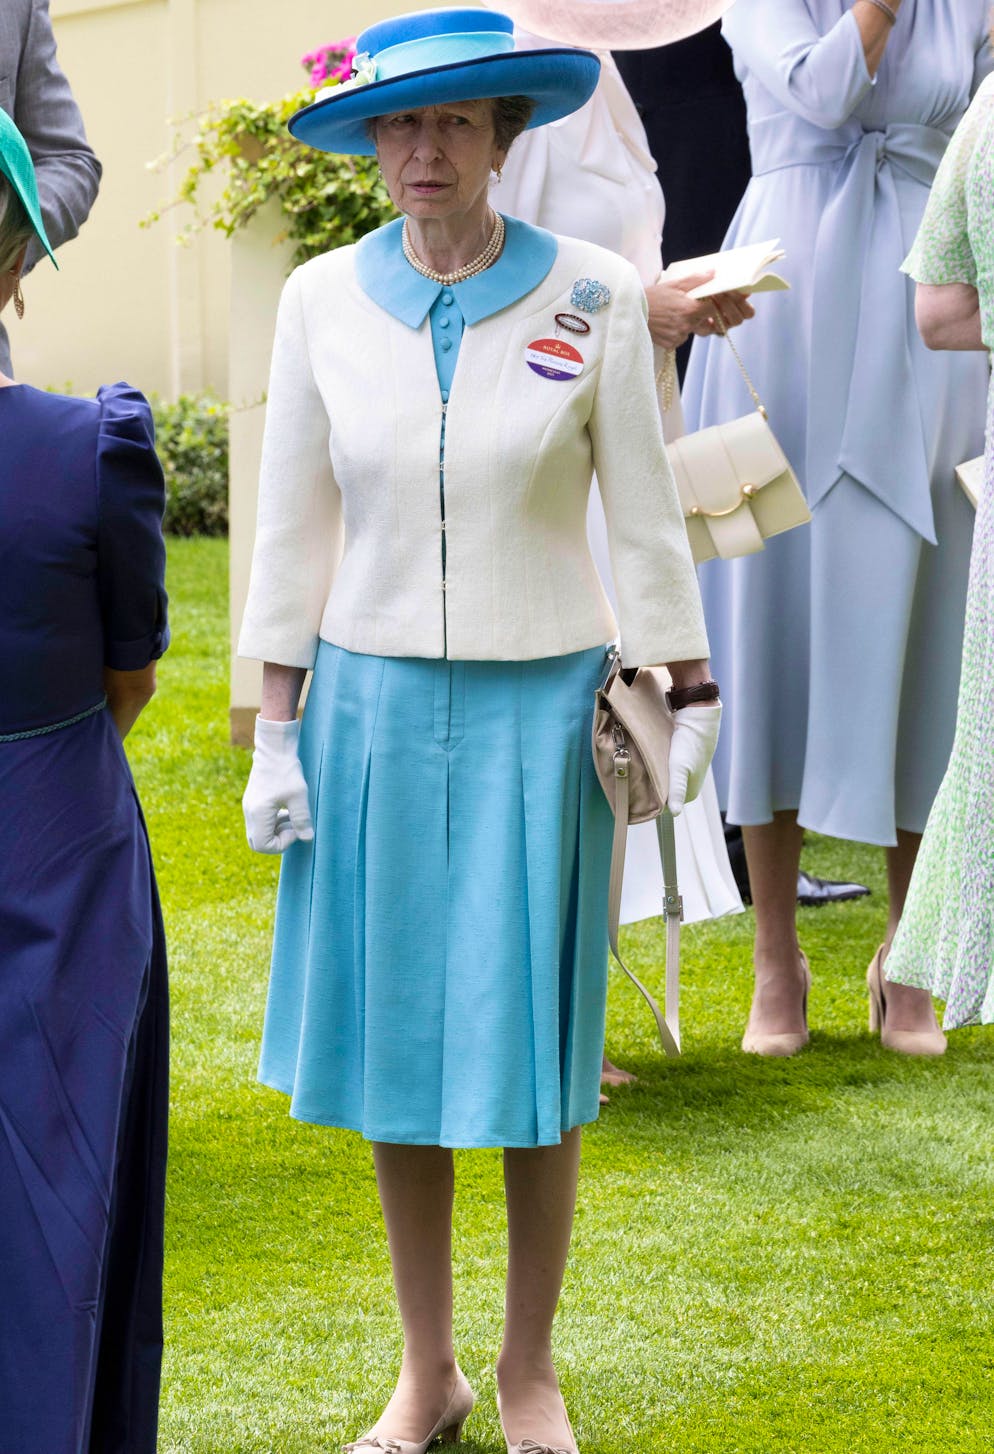 The most beautiful views from Royal Ascot.  Princess Anne chose the sky blue ensemble this year.  The rather conservative dress has a round neckline, a delicate button placket and a slightly flared skirt that falls in pleats.